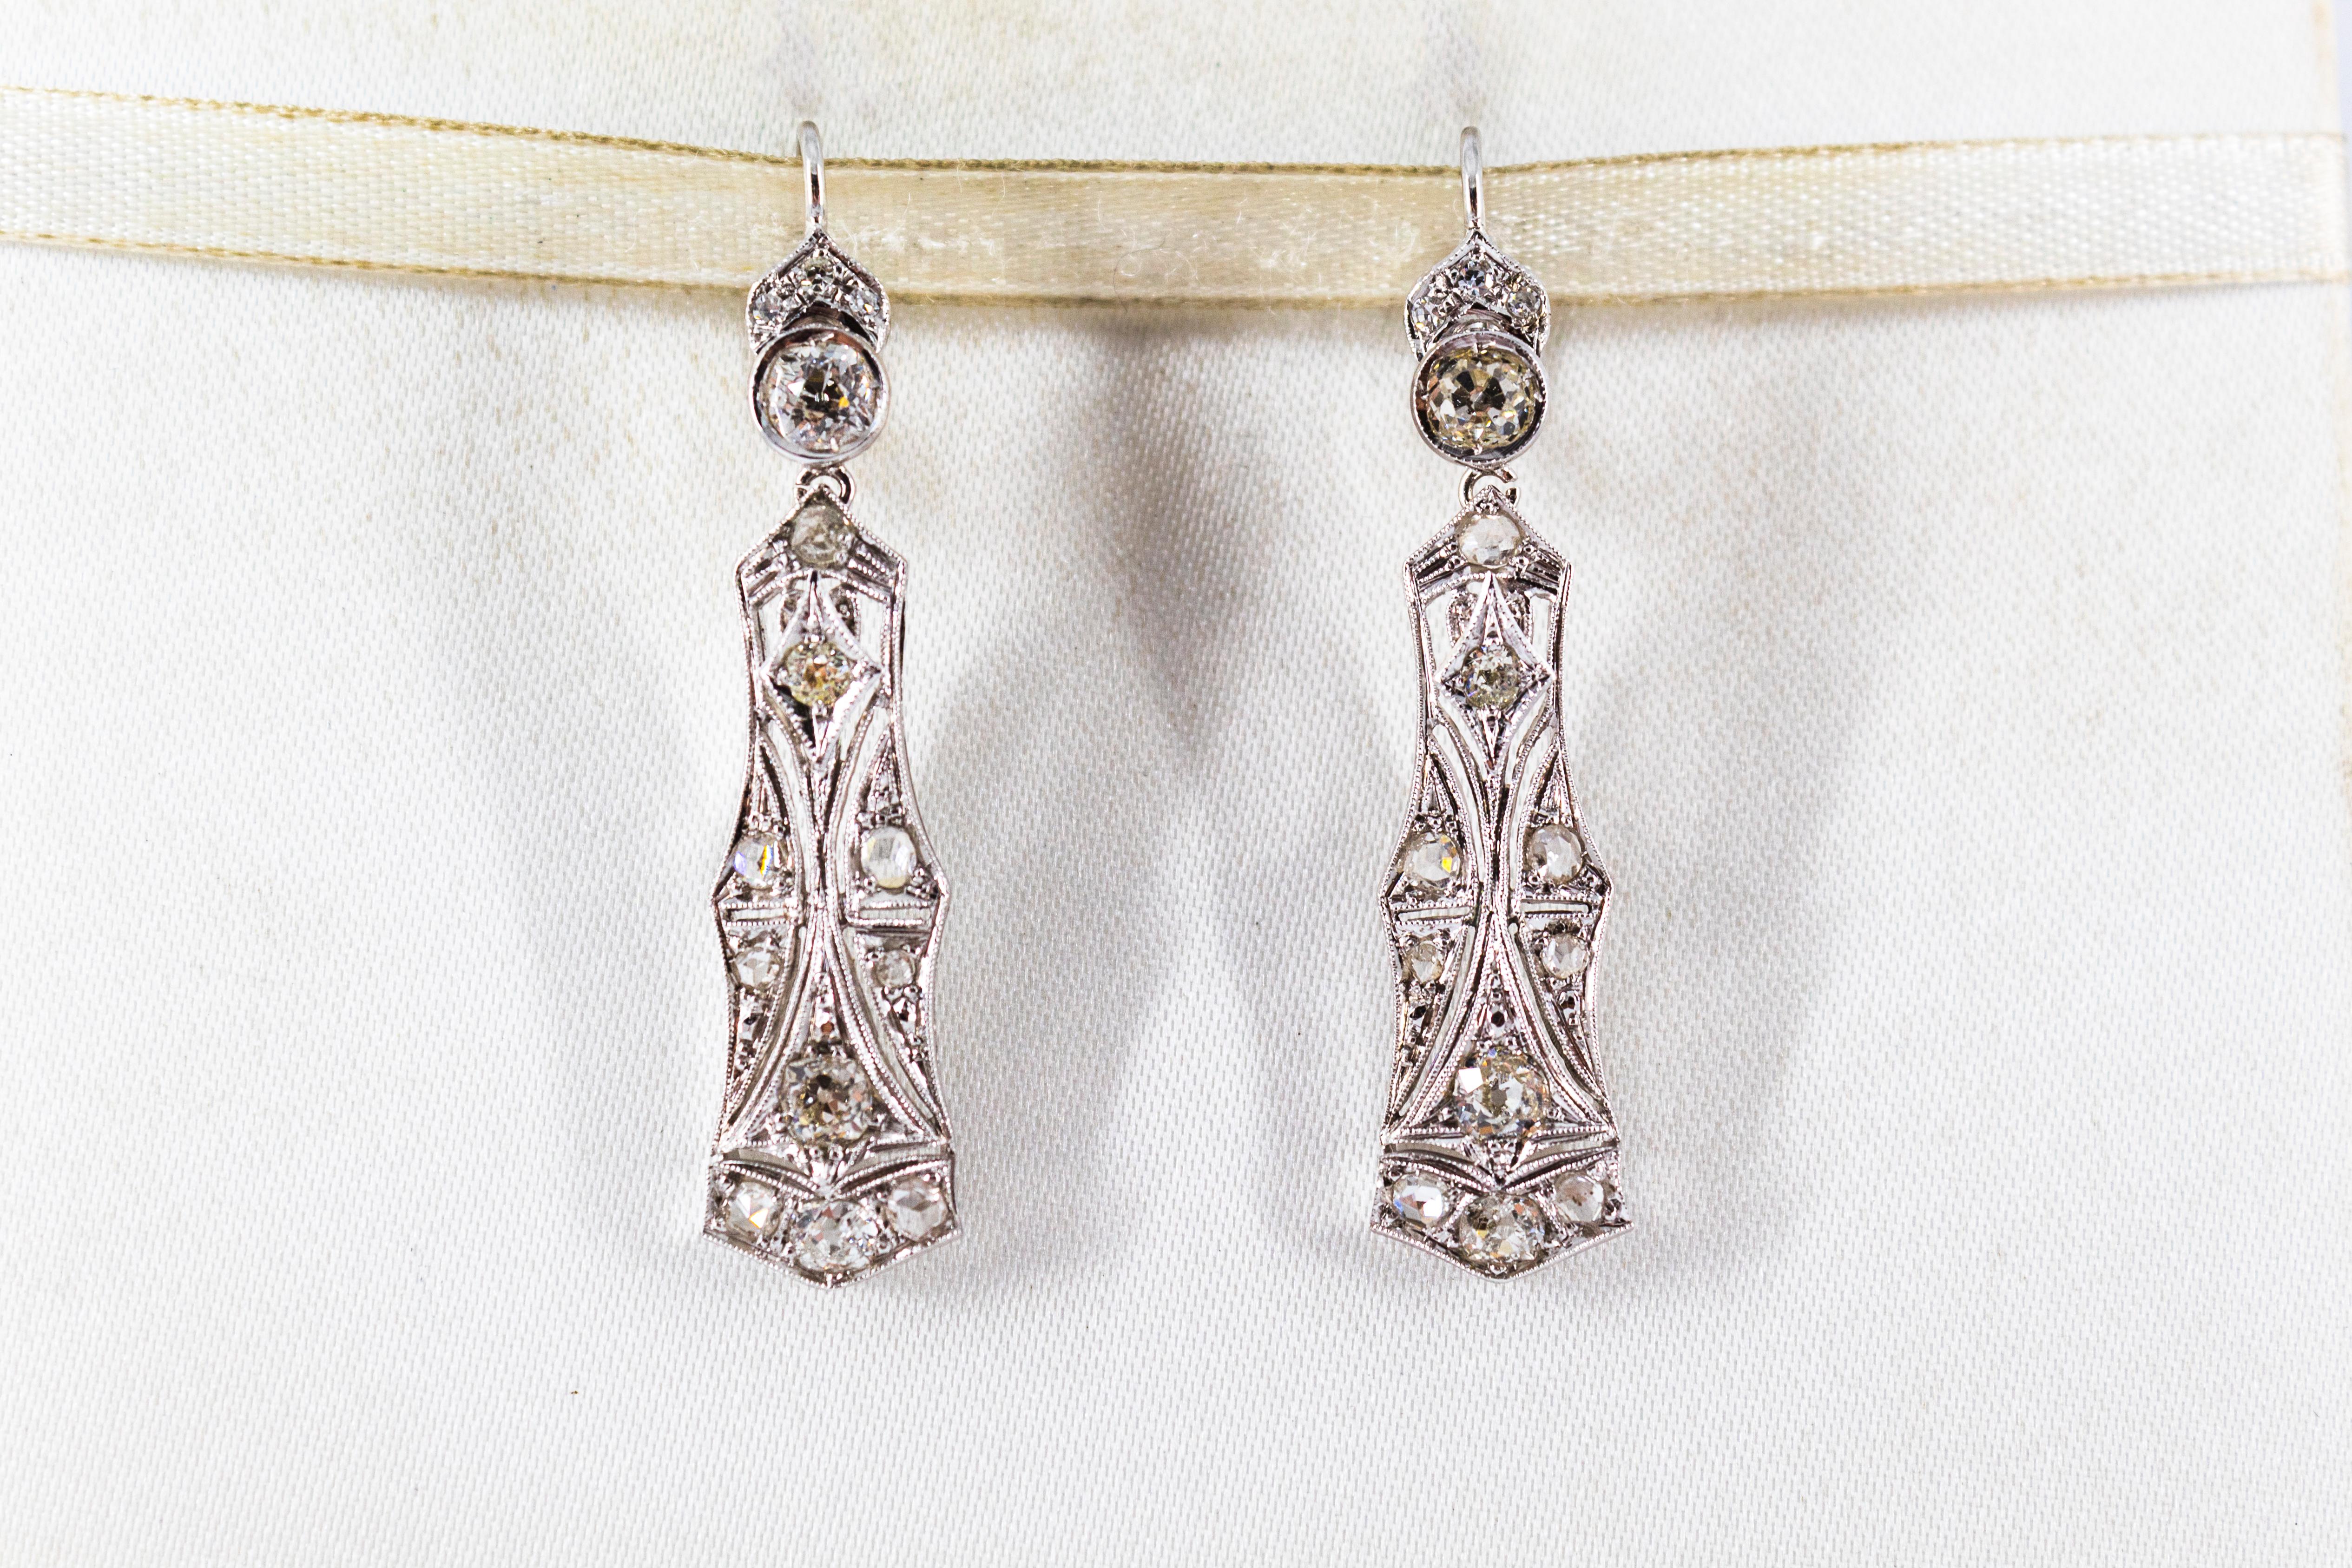 These Earrings are made of 18K White Gold.
These Earrings have 2.40 Carats of White Old European Cut Diamonds and White Rose Cut Diamonds.
These Earrings are inspired by Renaissance Style.
All our Earrings have pins for pierced ears but we can